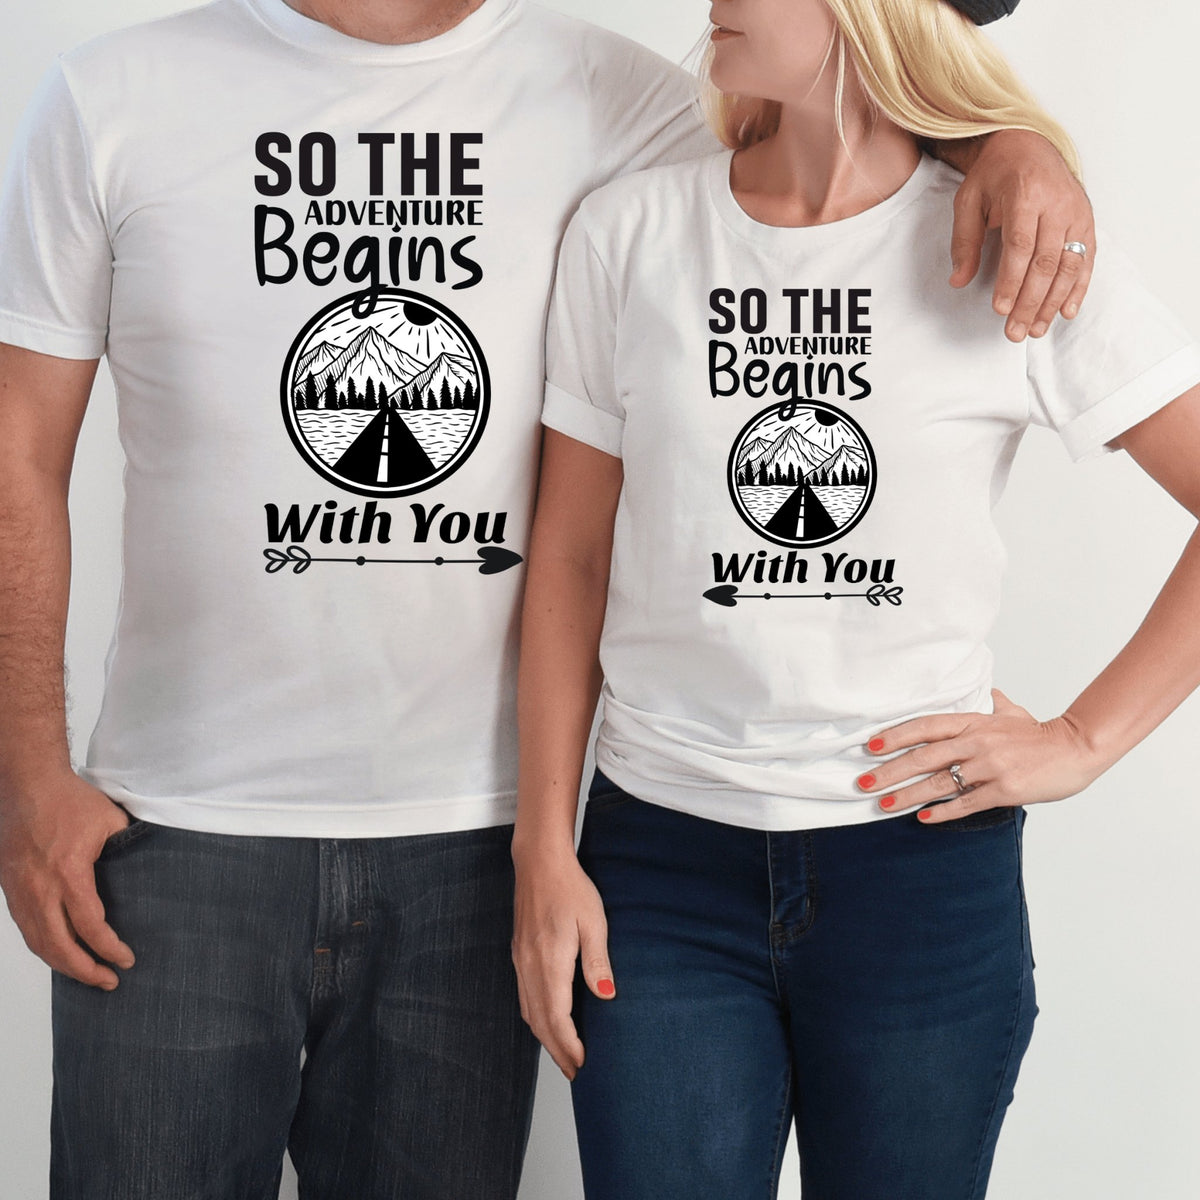 So The Adventure Begins With You Couples T-Shirt - Eventwisecreations